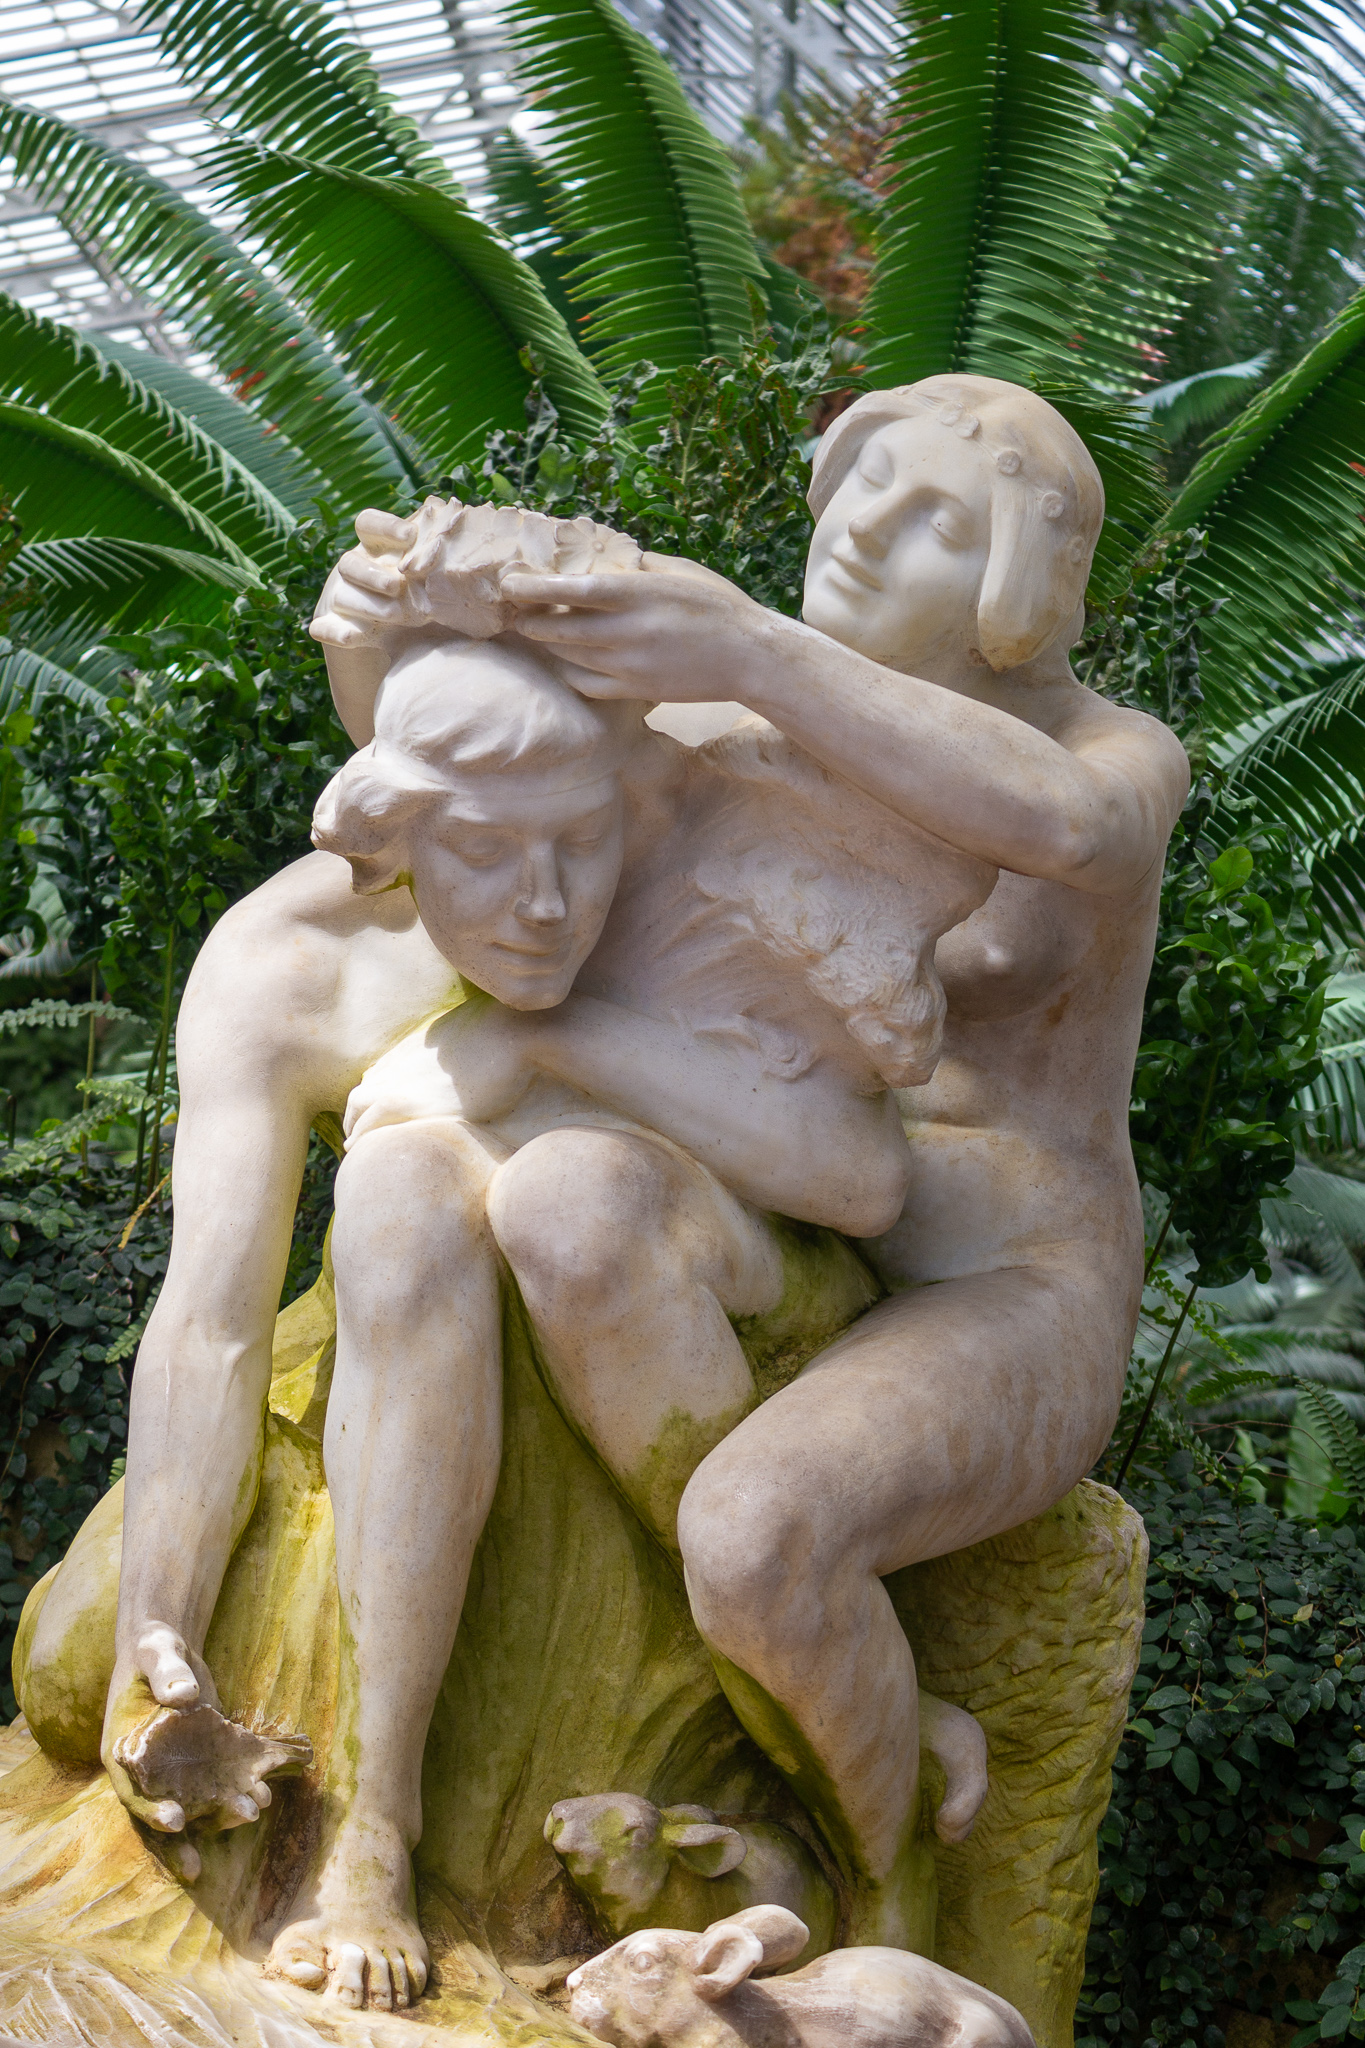 Full portrait of a white marble sculpture of two youths, one laying a wreath of leaves on the head of the other, the fronds of a palm spread above them